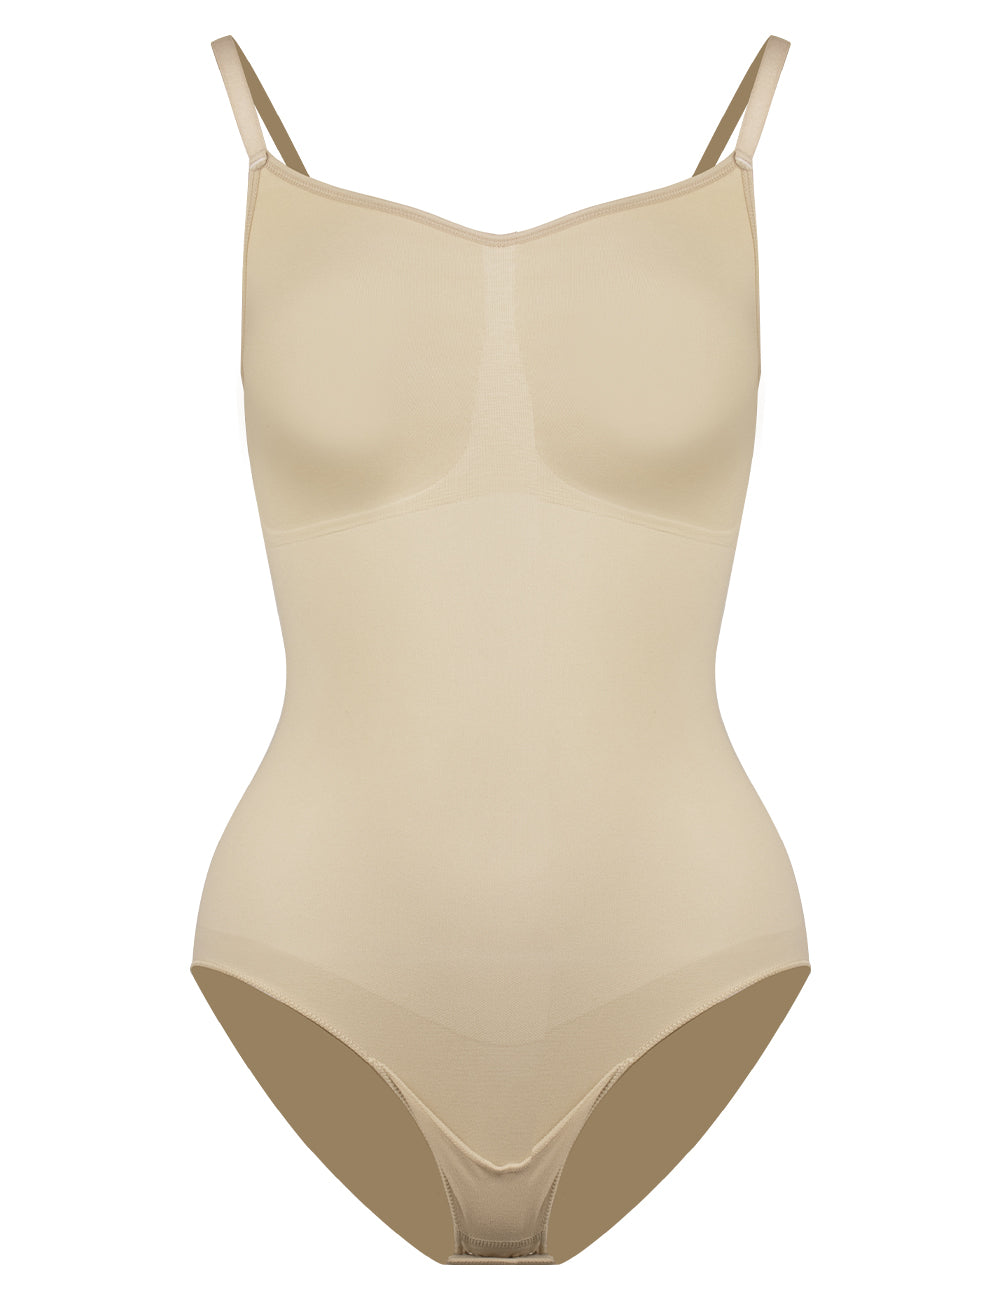 niidor-Nude Seamless Barely There Brief Bodysuit seamless shapewear